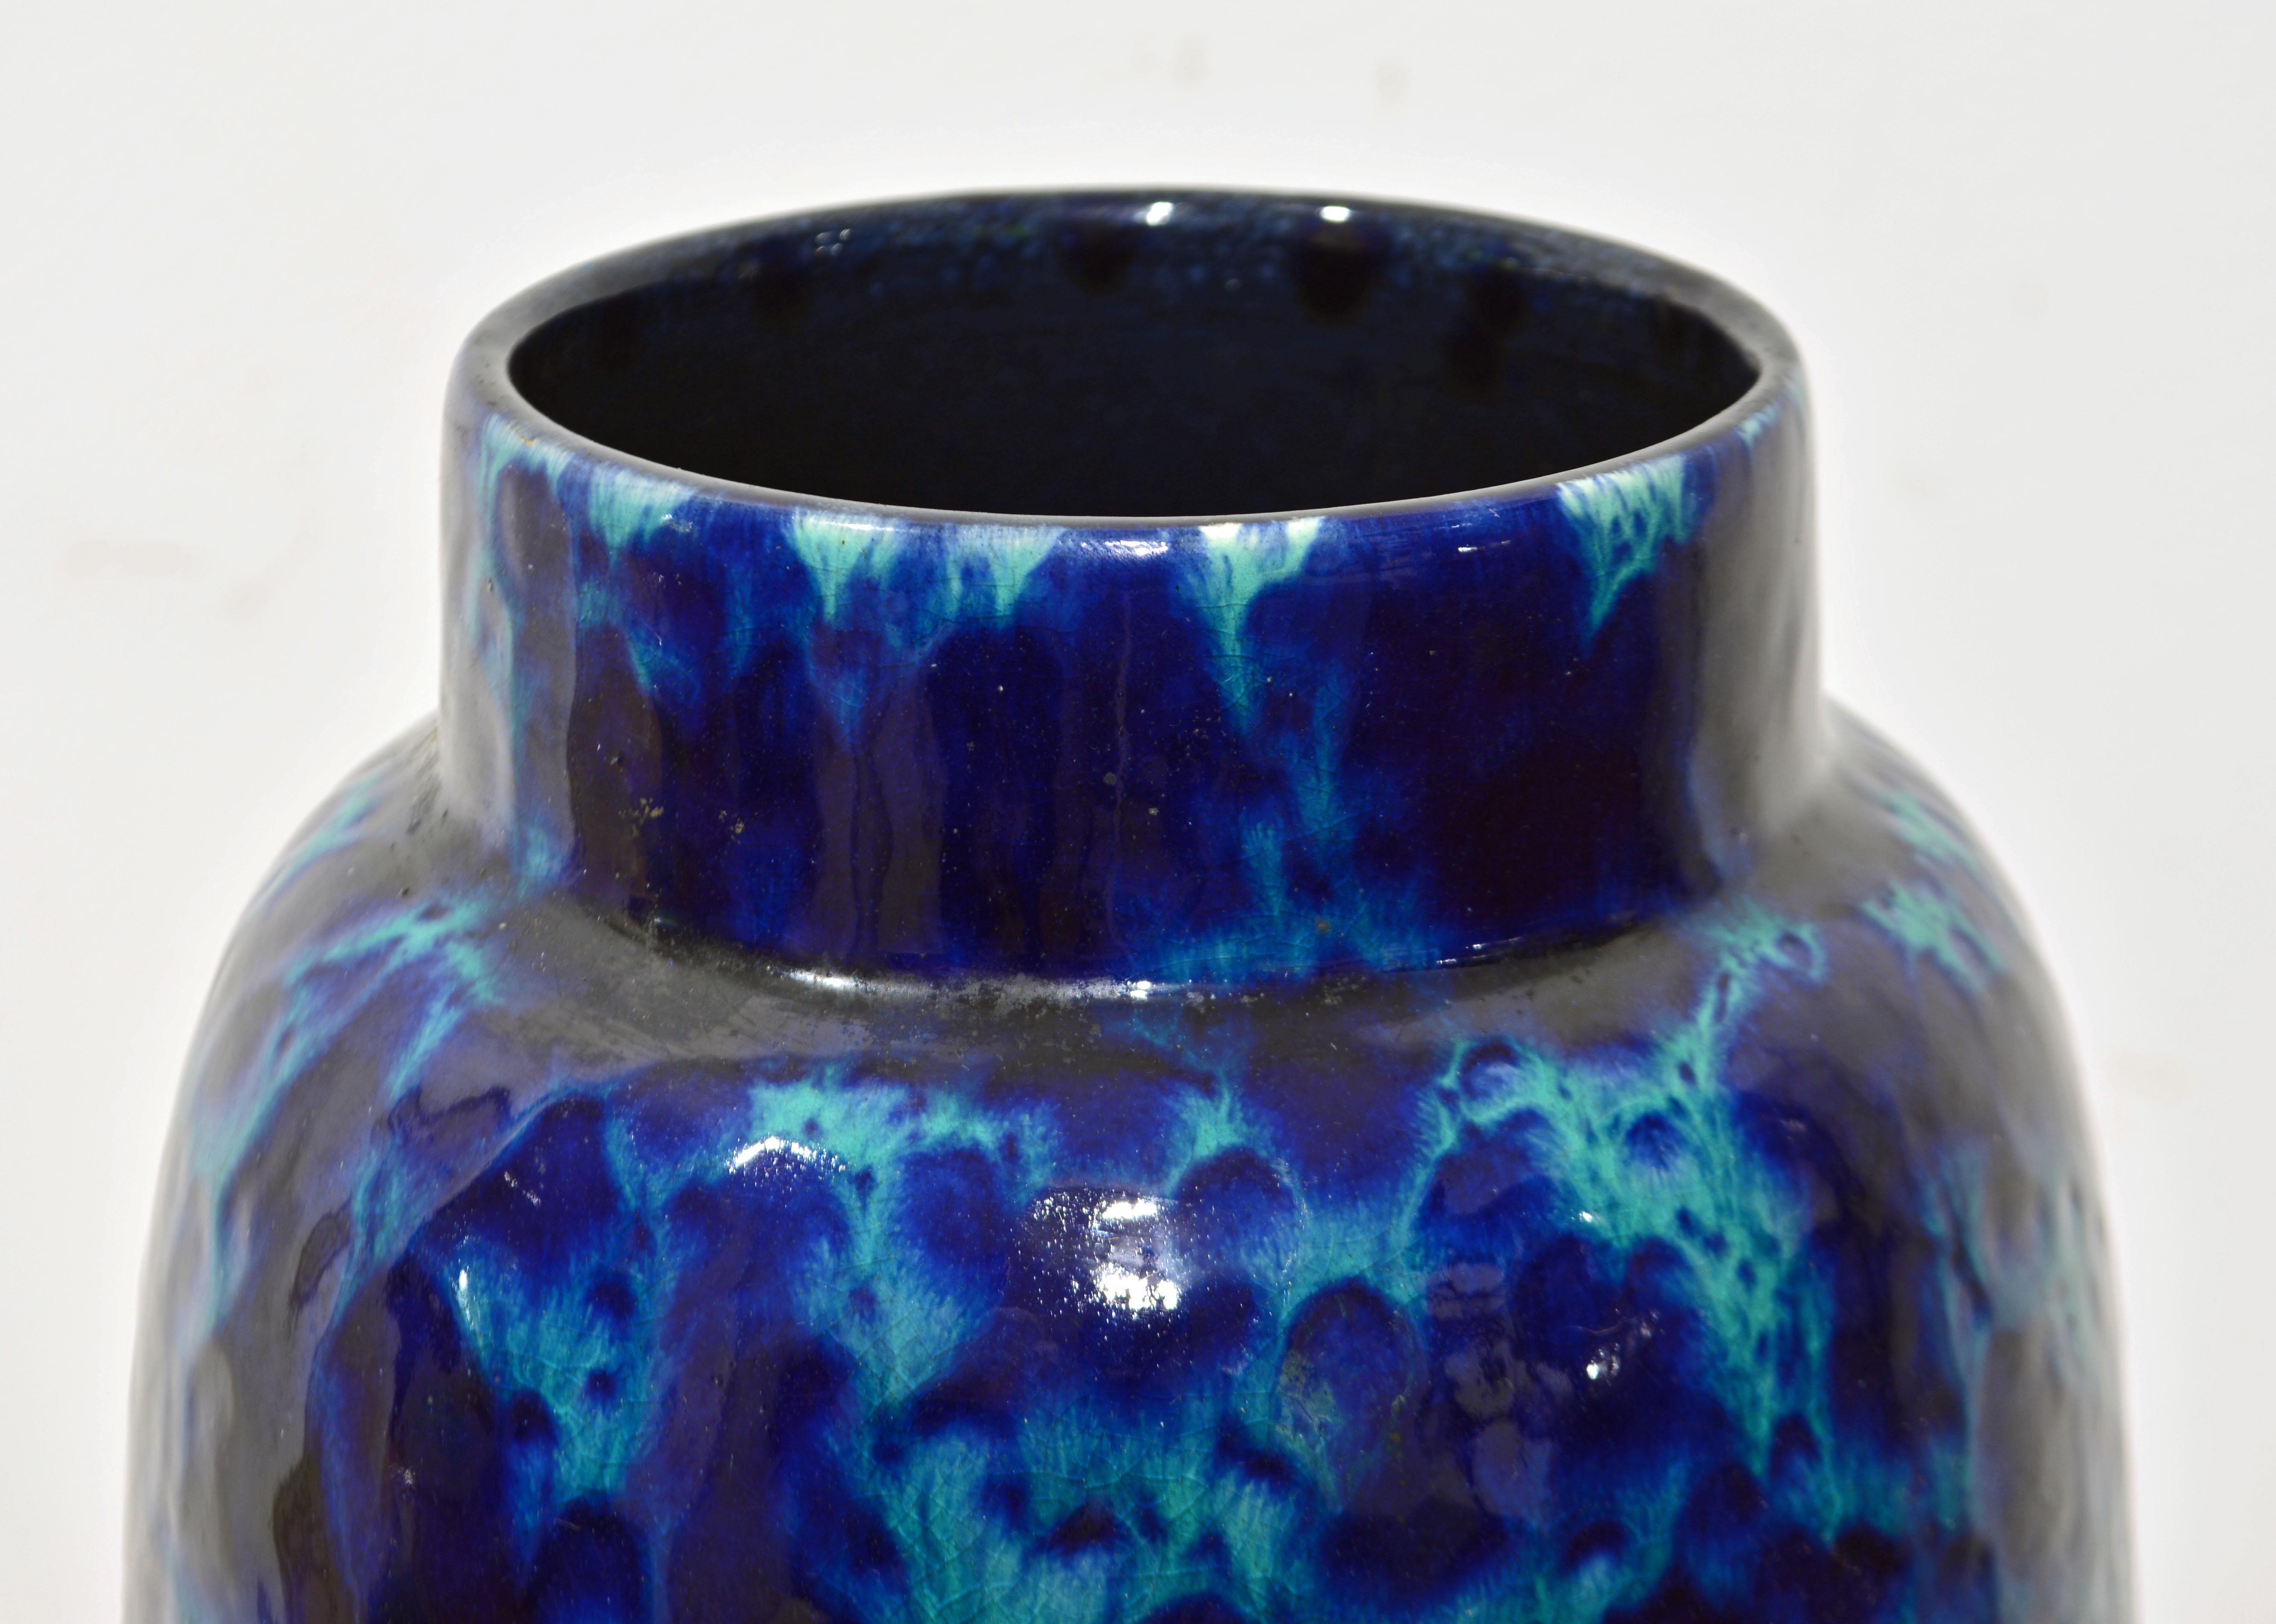 Glazed German Mid Century Modern Deep Blue and Turquoise Art Pottery Vase by Scheurich For Sale